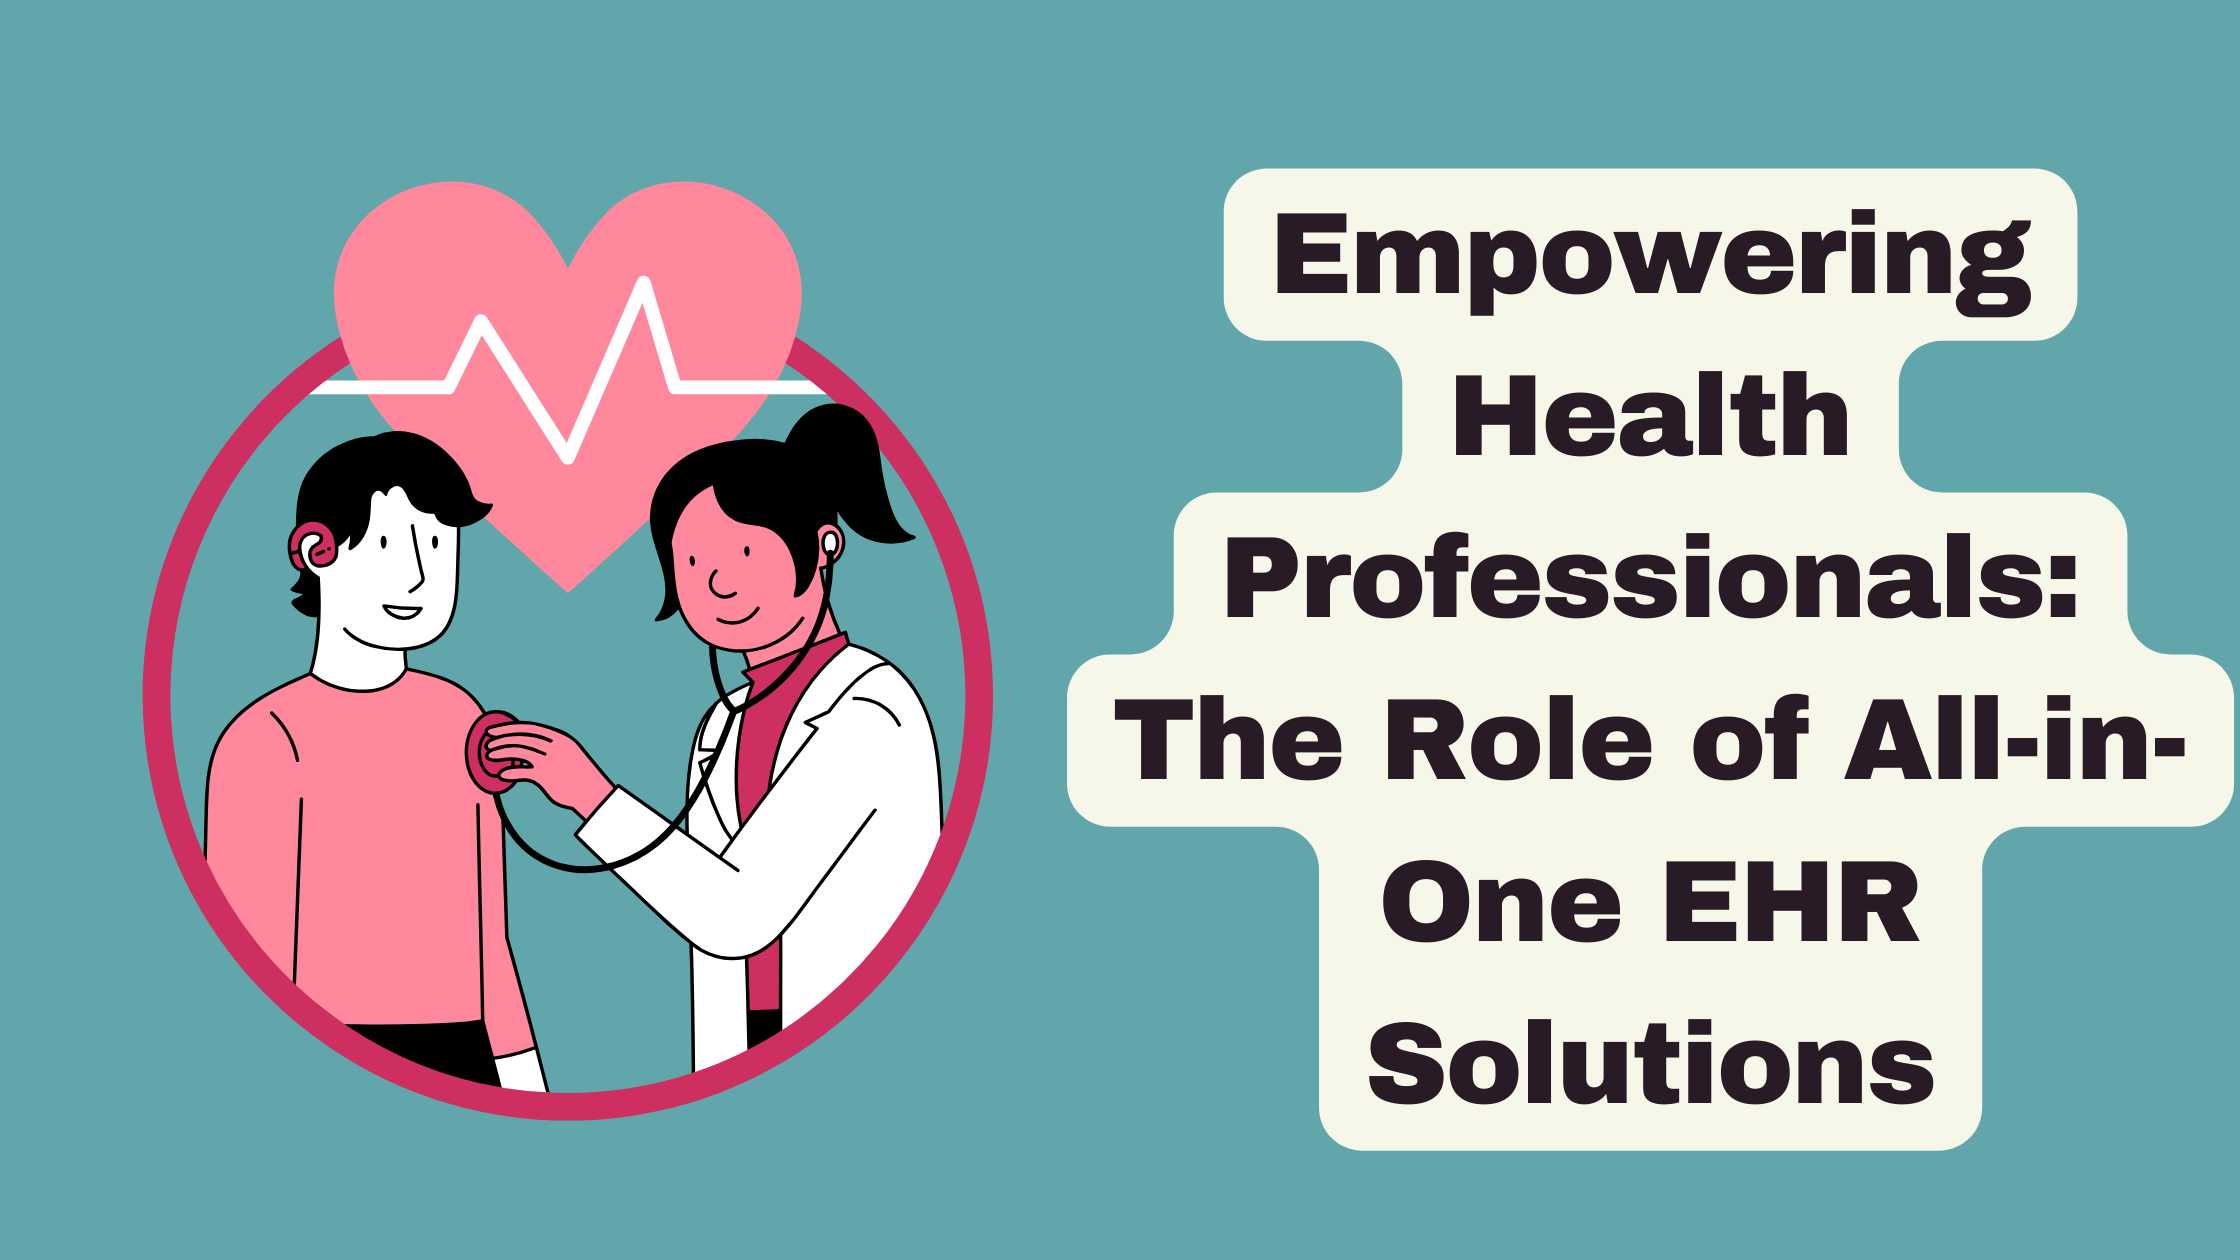 Empowering Health Professionals: The Role of All-in-One EHR Solutions